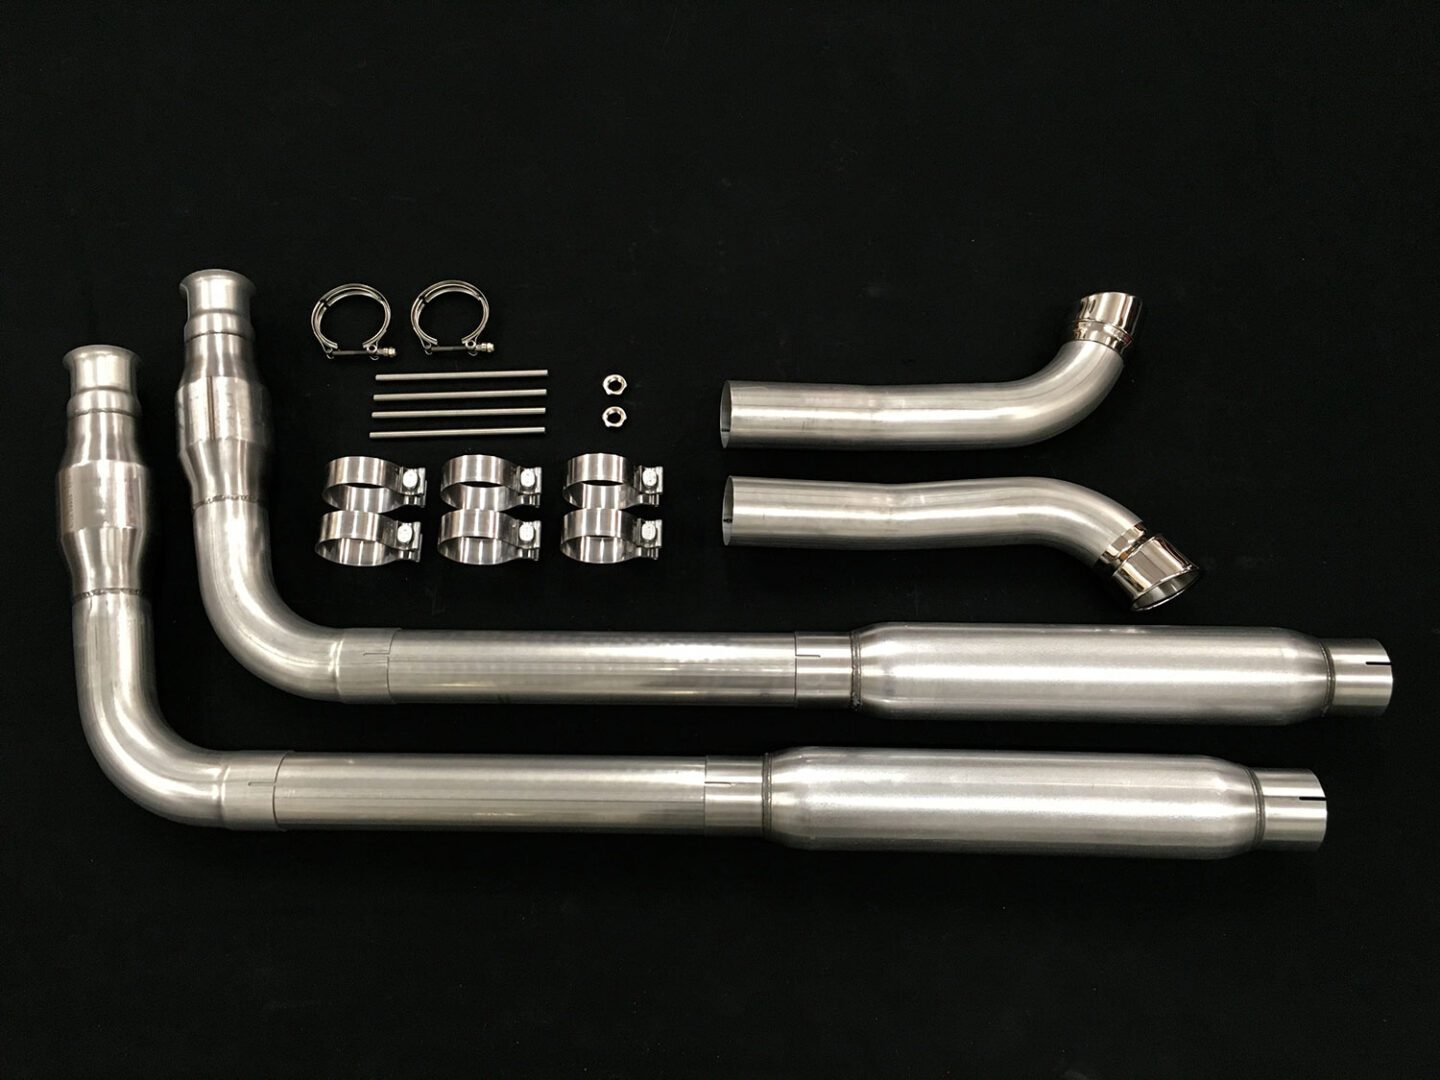 A pair of pipes and other parts are shown.